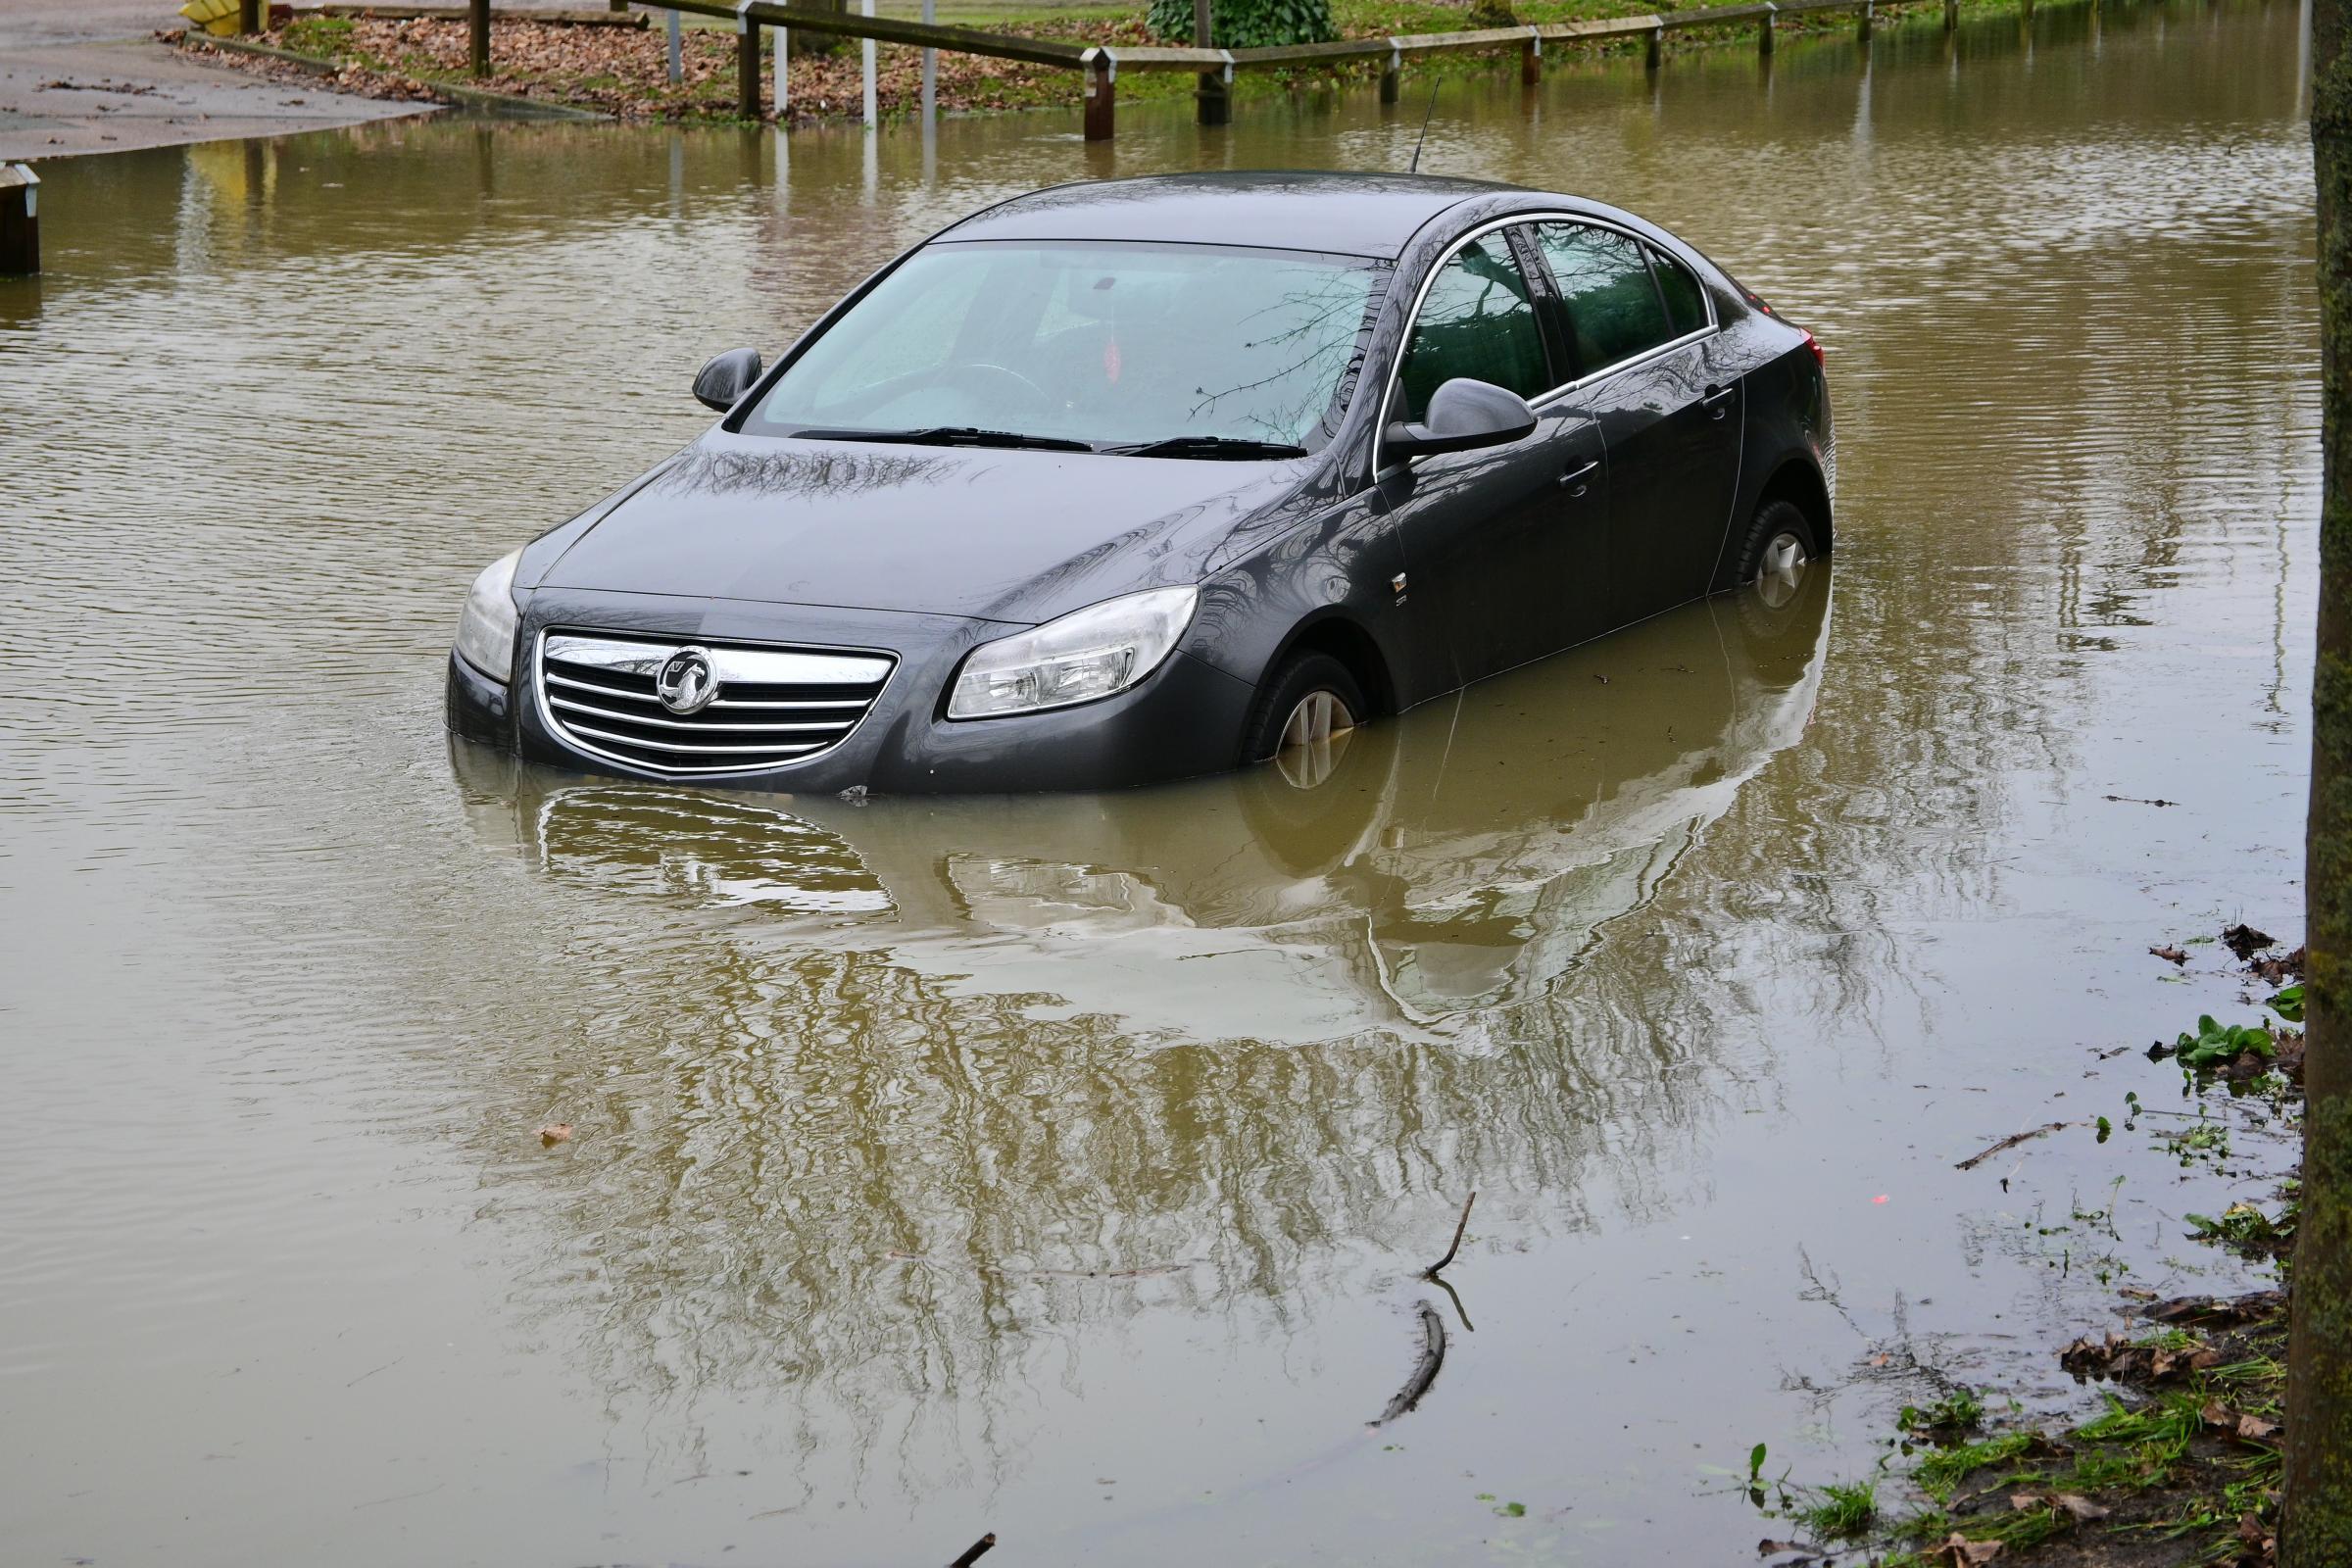 Images show flooding in Water Lane, Watford. Photos: Rory Robinson